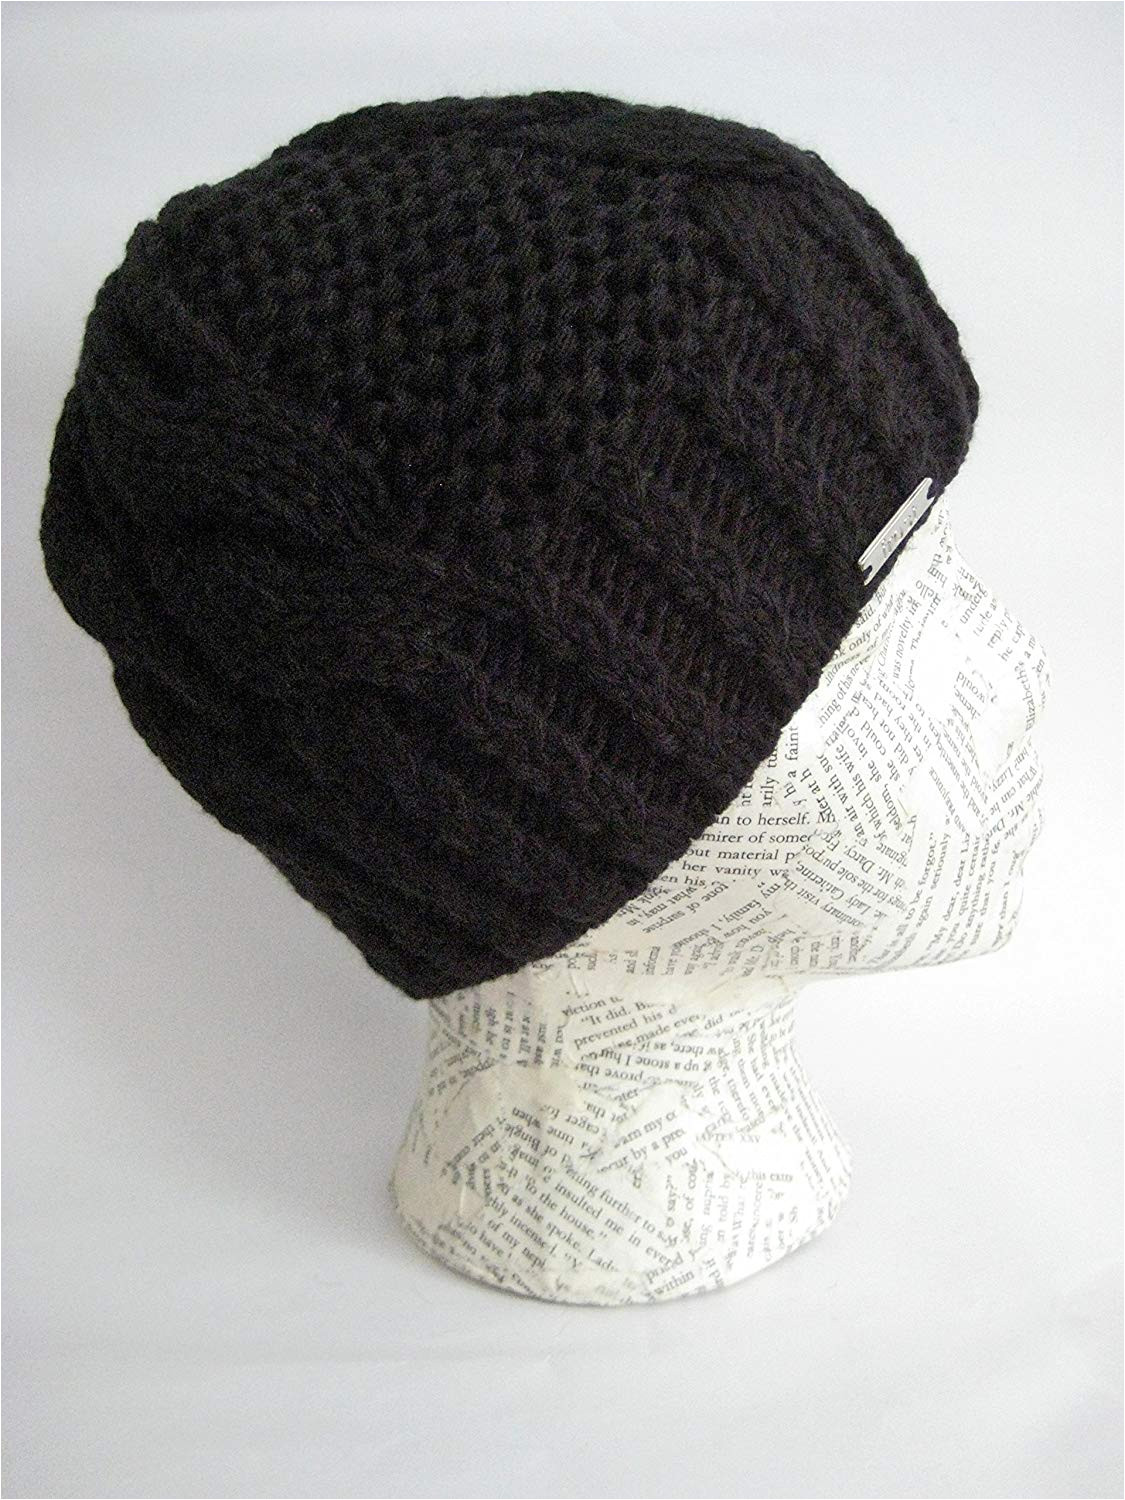 frost hats cable knit winter beanie m 80nds black at amazon women s clothing store